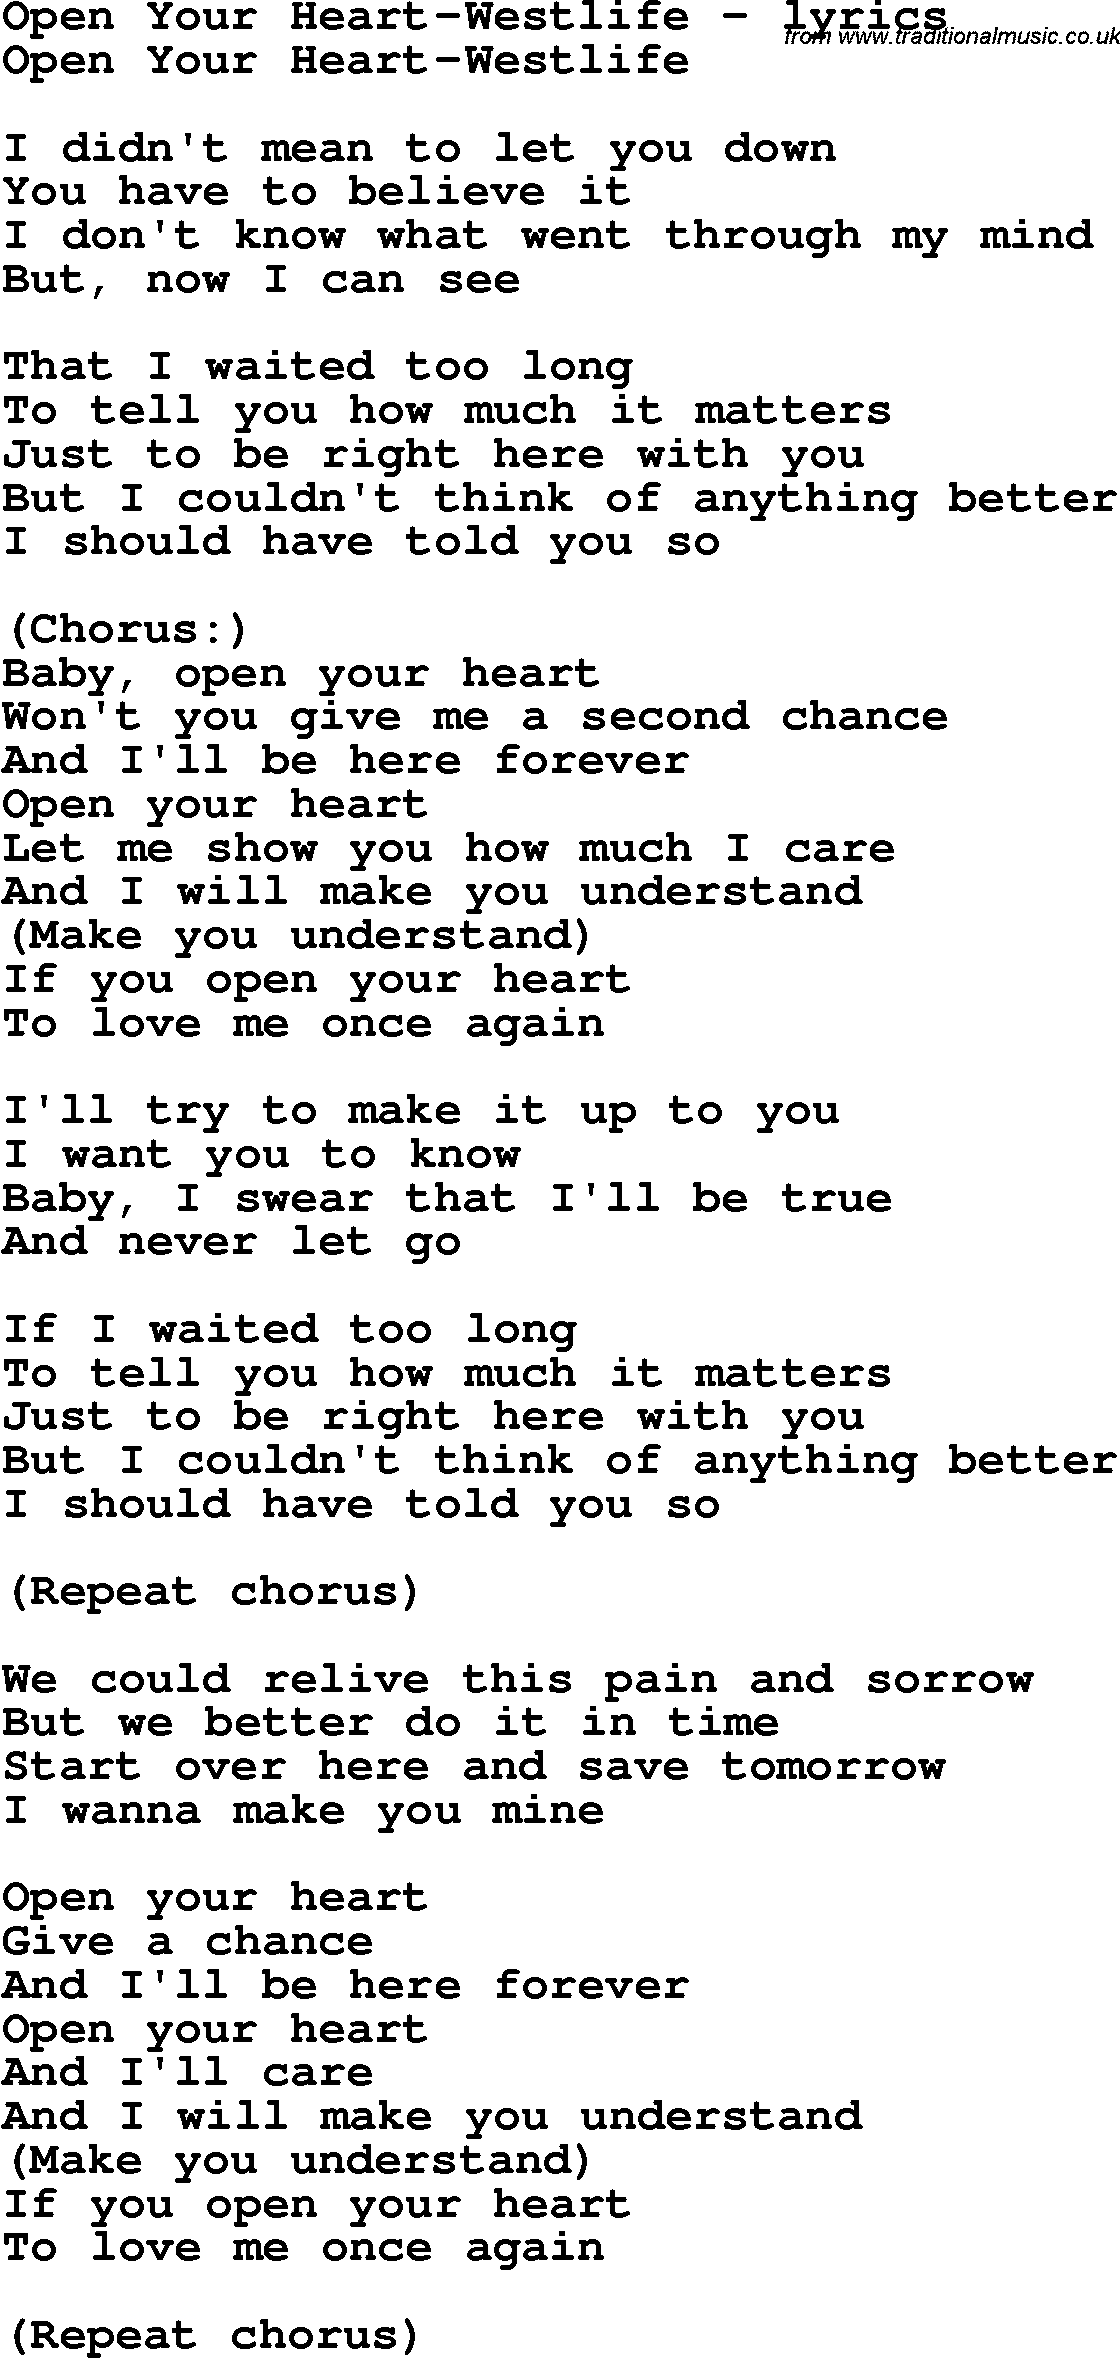 Love Song Lyrics for: Open Your Heart-Westlife